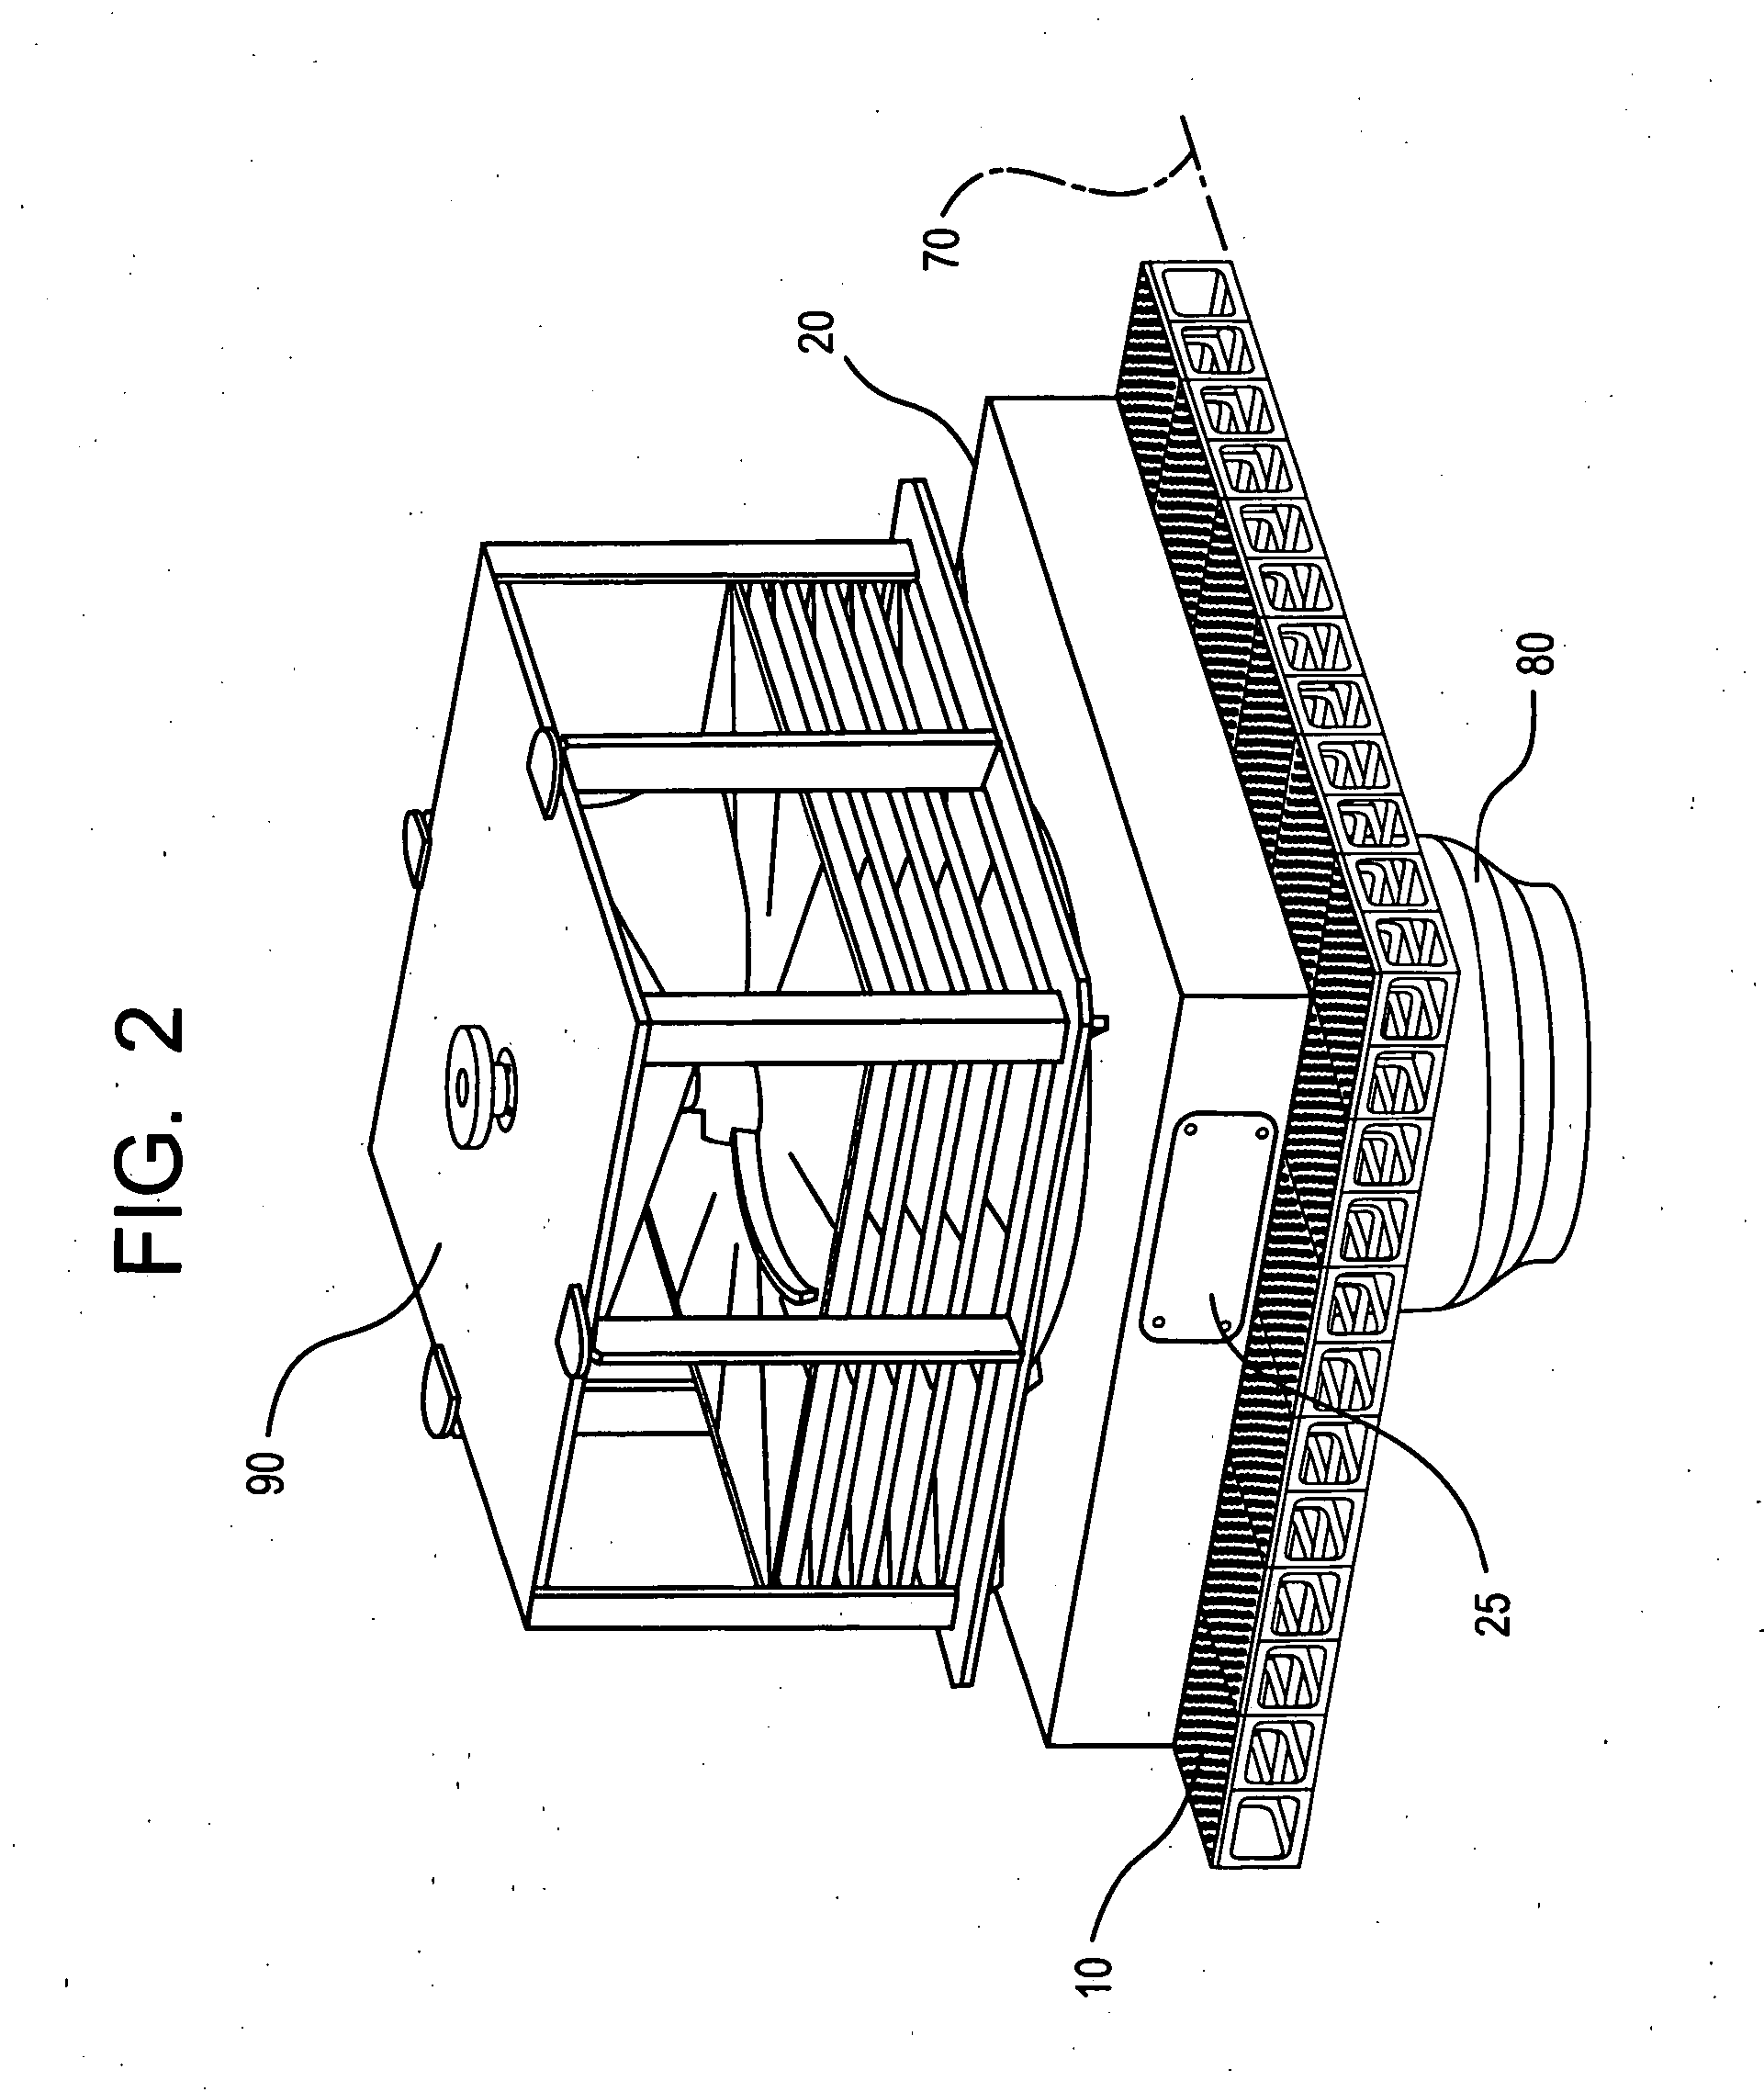 Floor tile debris interceptor and transition plenum in a nuclear power plant